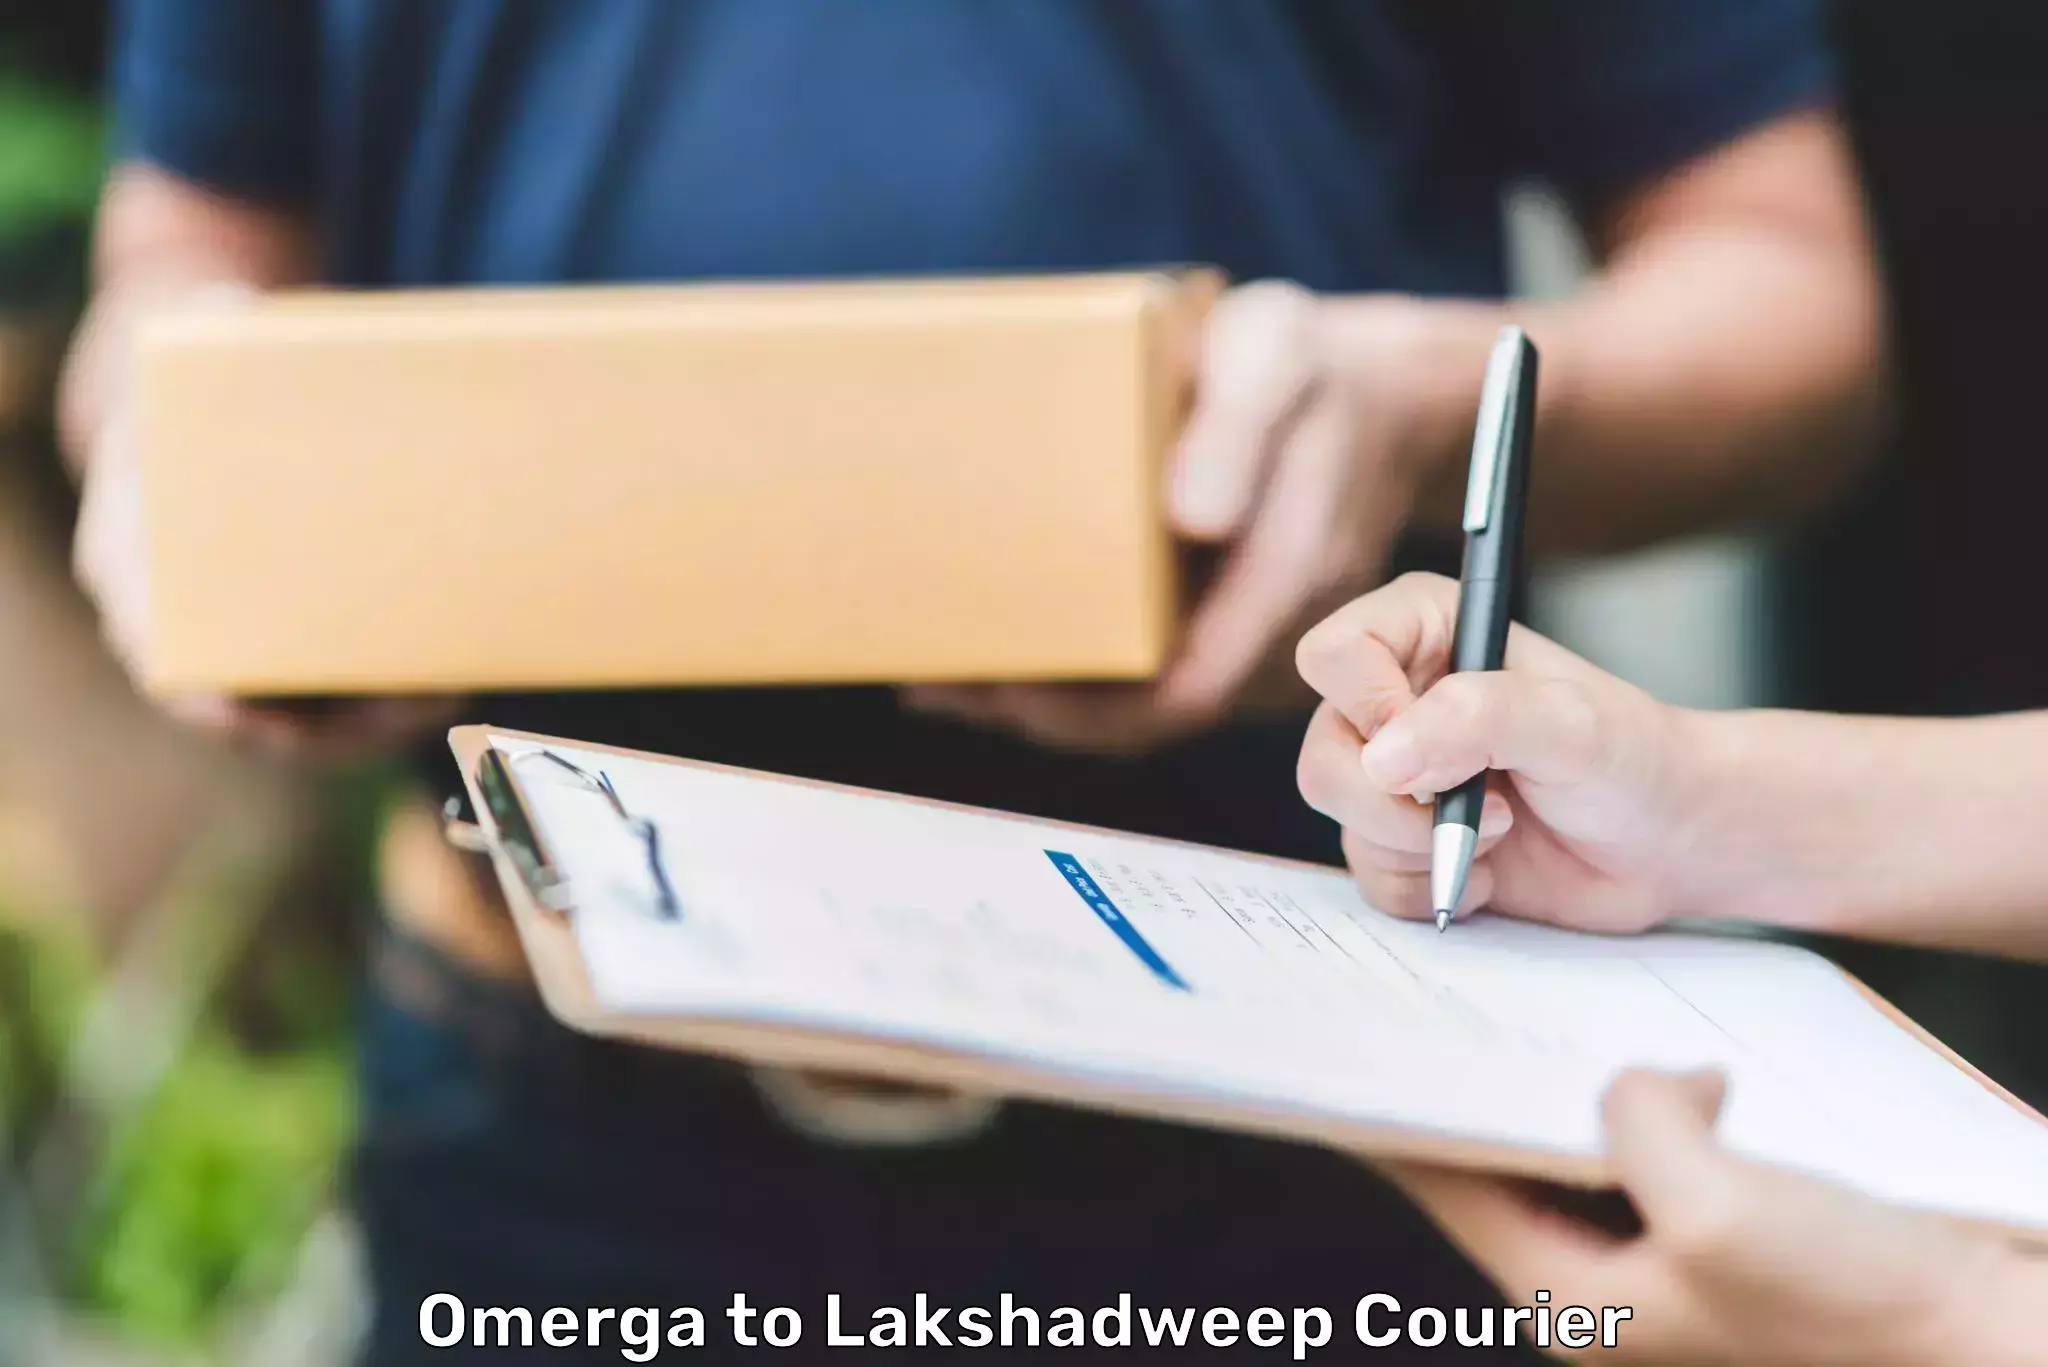 Speedy delivery service Omerga to Lakshadweep